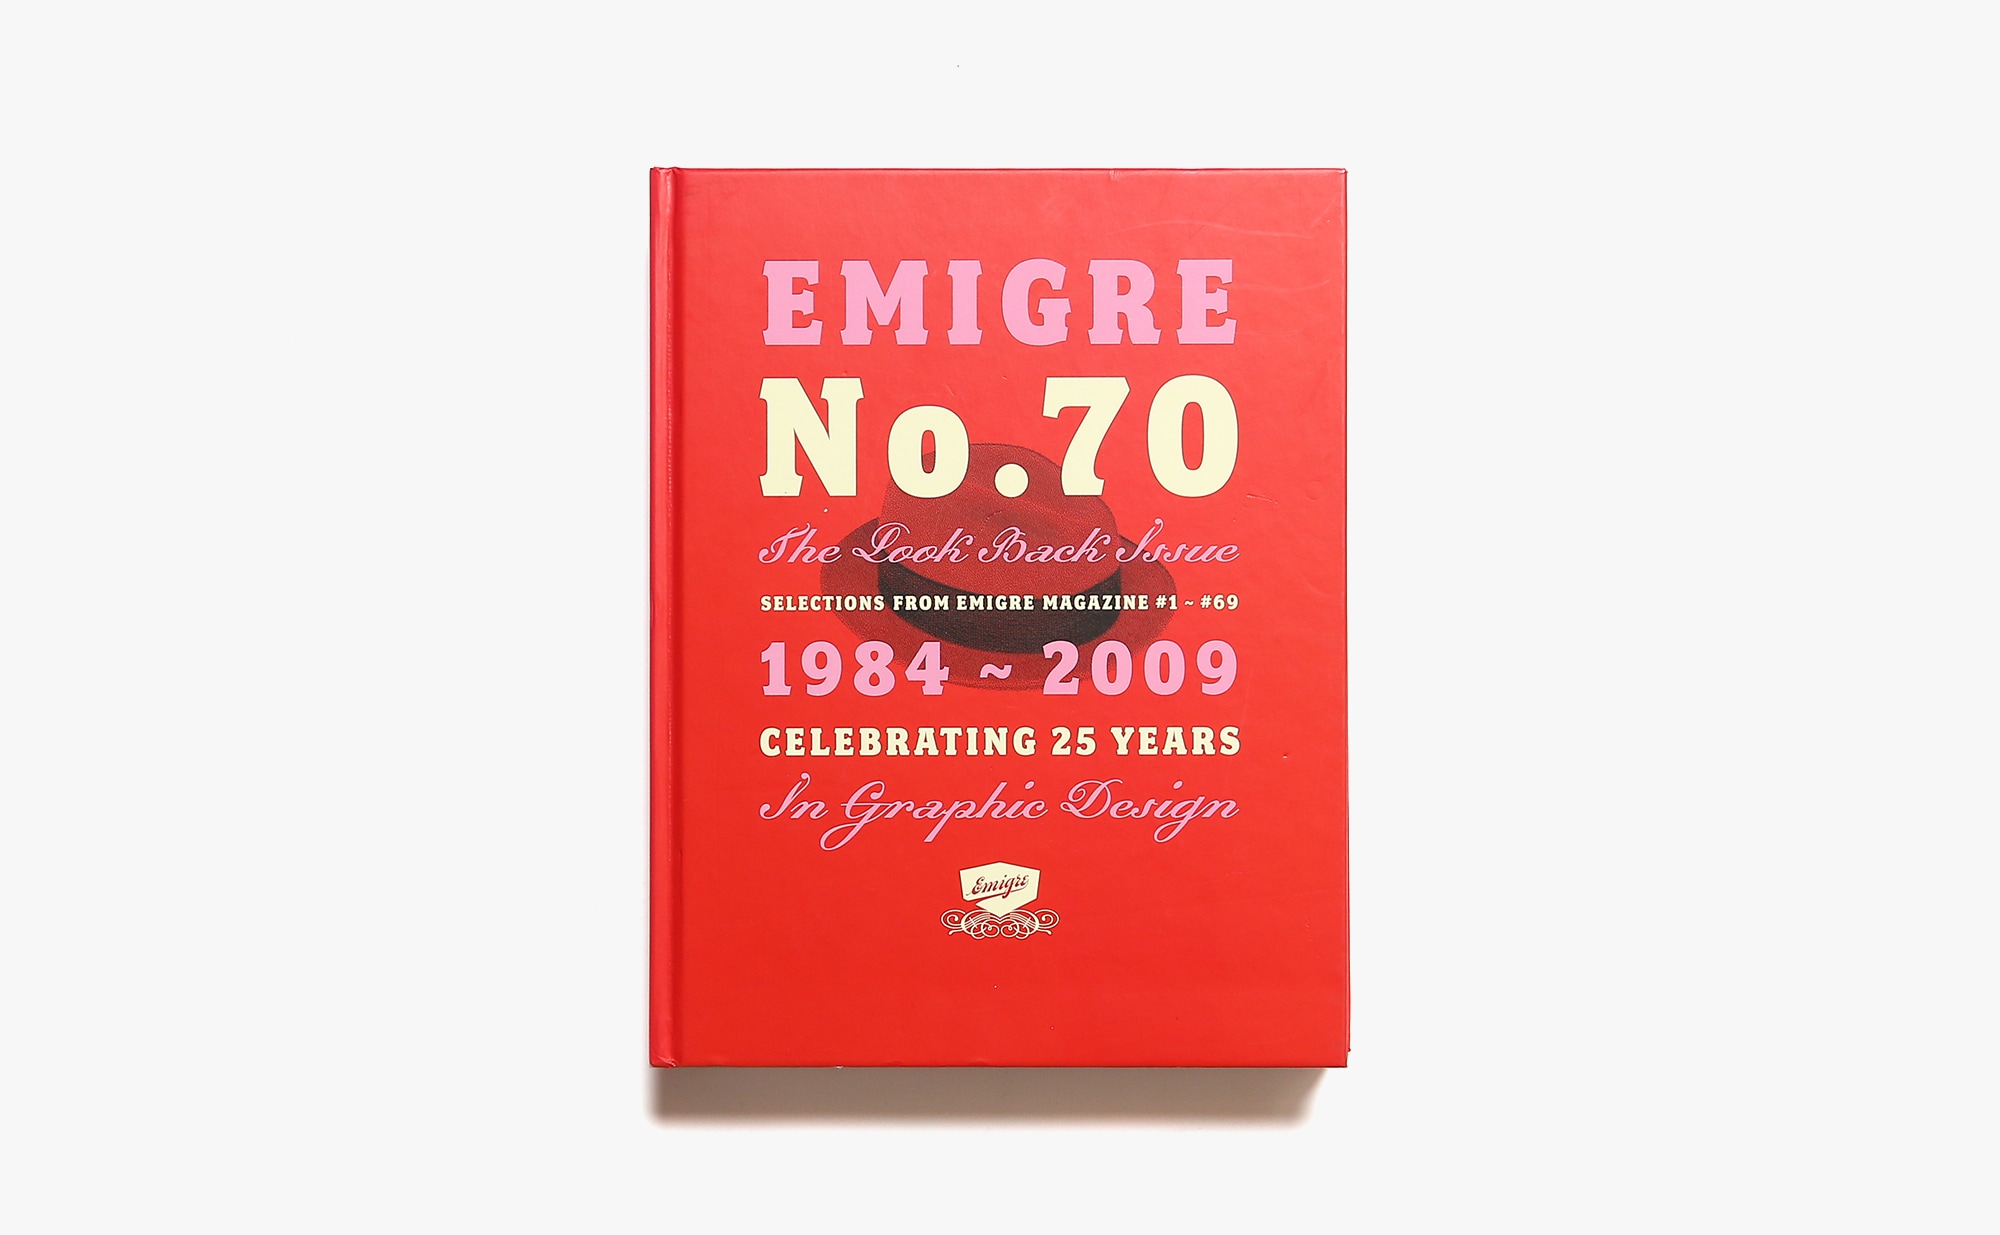 Emigre No. 70 the Look Back Issue | エミグレ